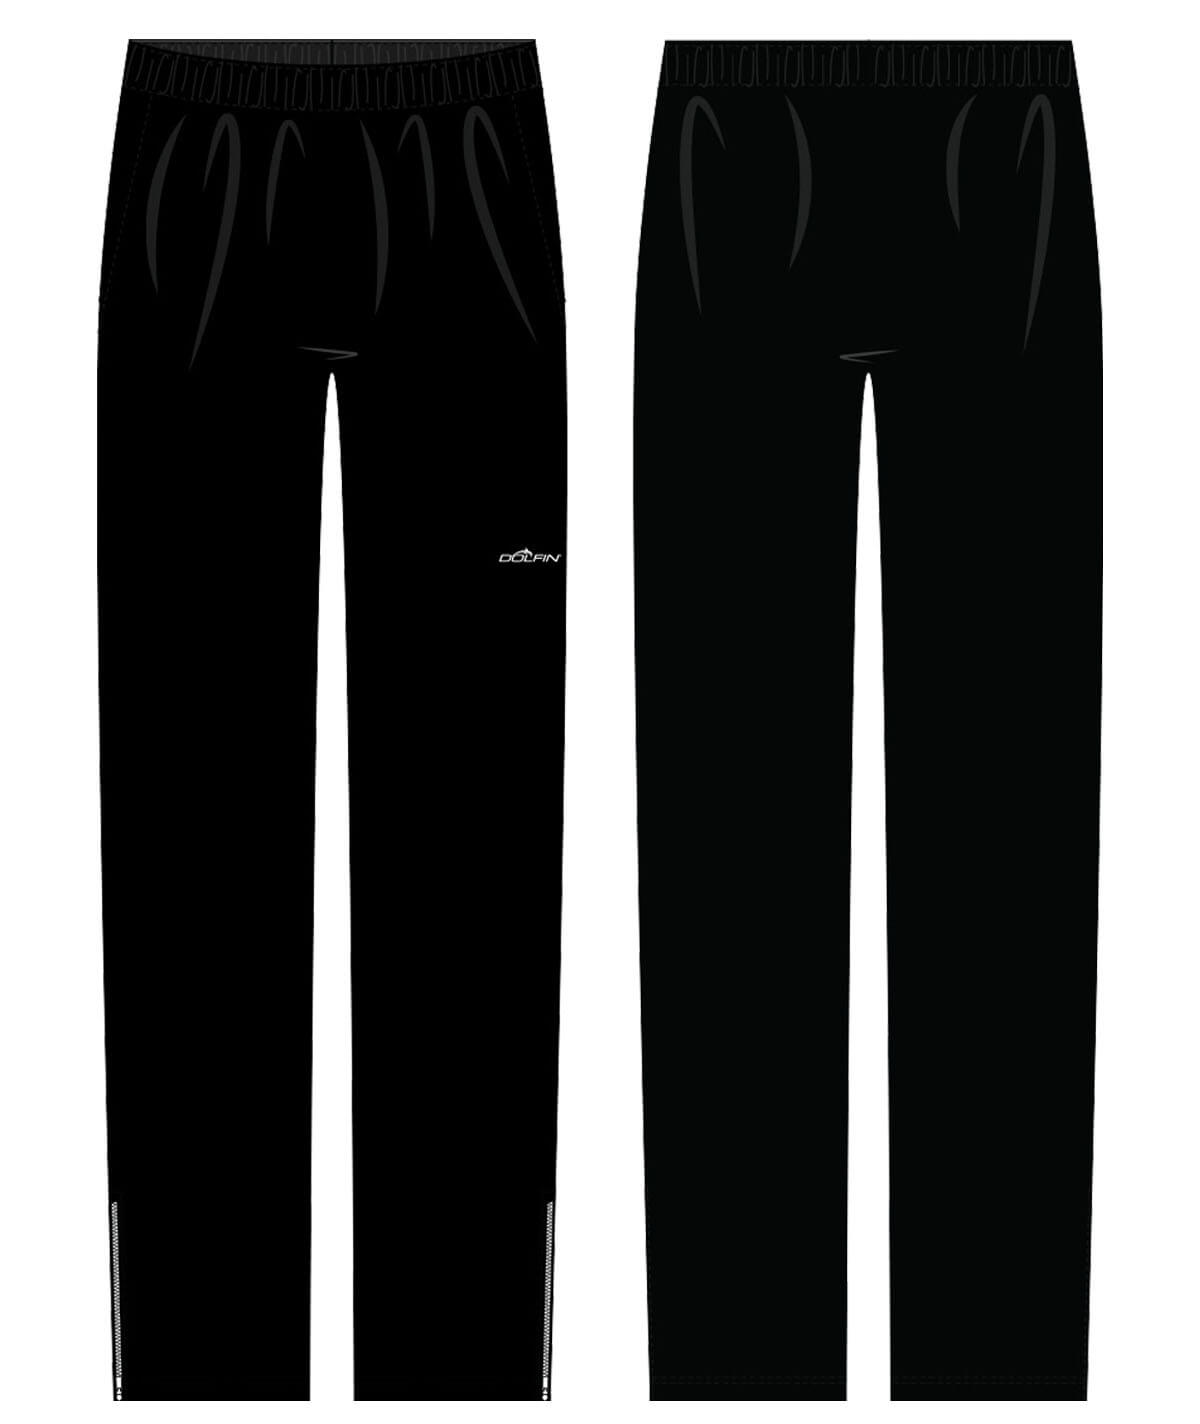 Fit Kit - Team Gear Female Warm Up Pant